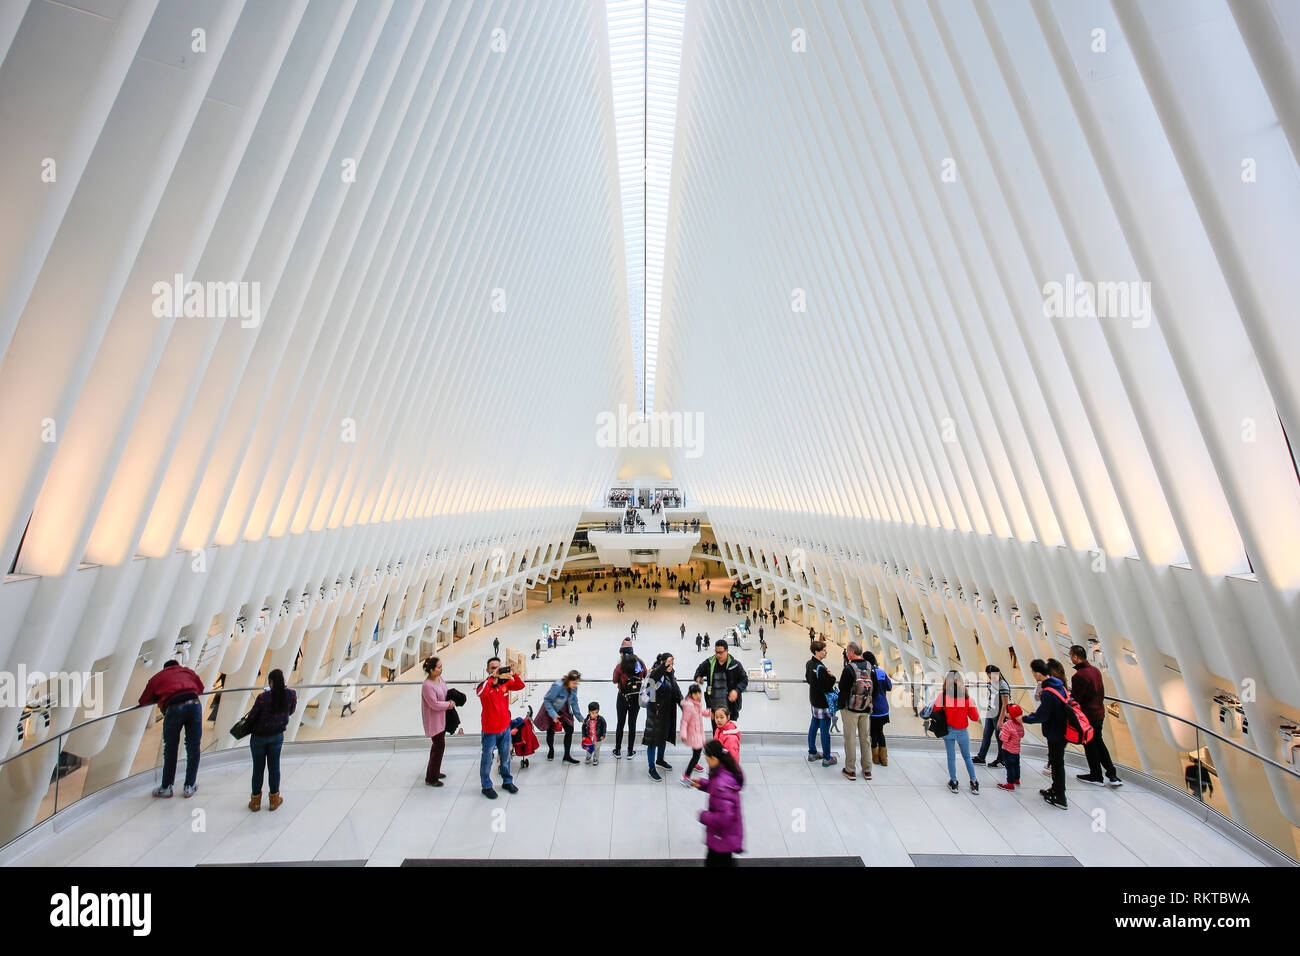 New York City, New York, United States of America - People in the Oculus, main hall of the subway station with shopping mall, World Trade Center, Tran Stock Photo